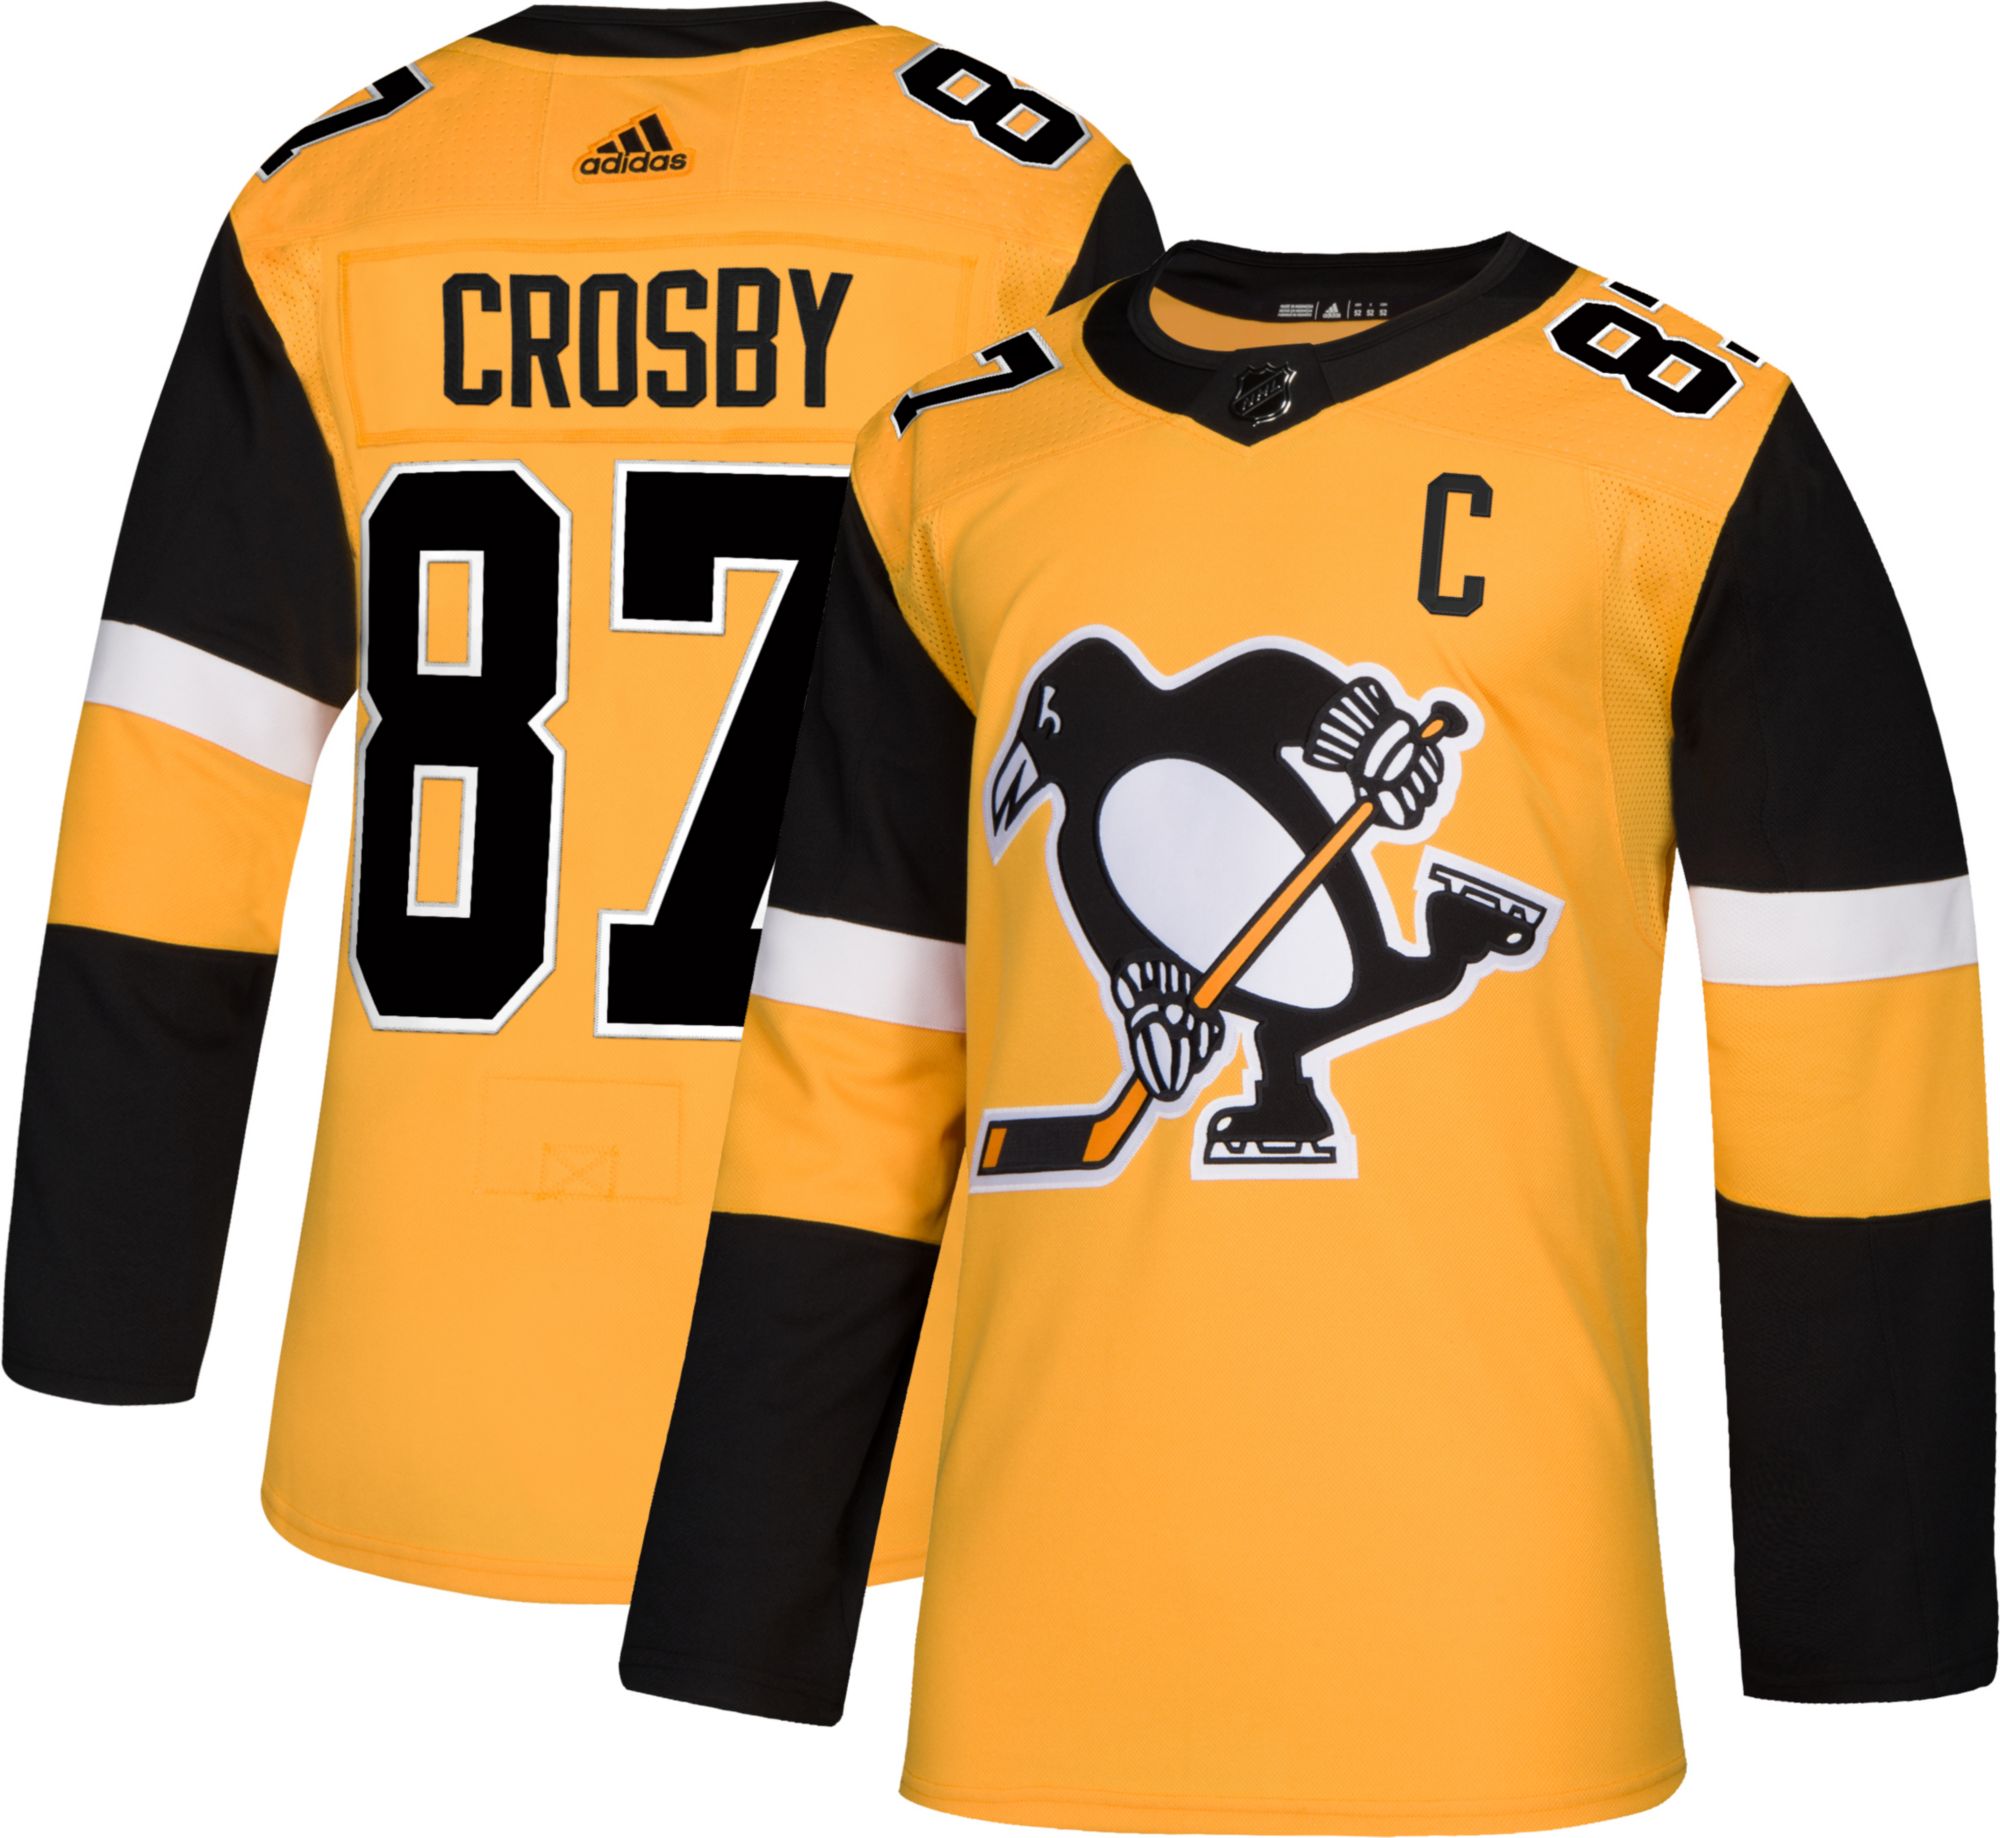 sidney crosby jersey number